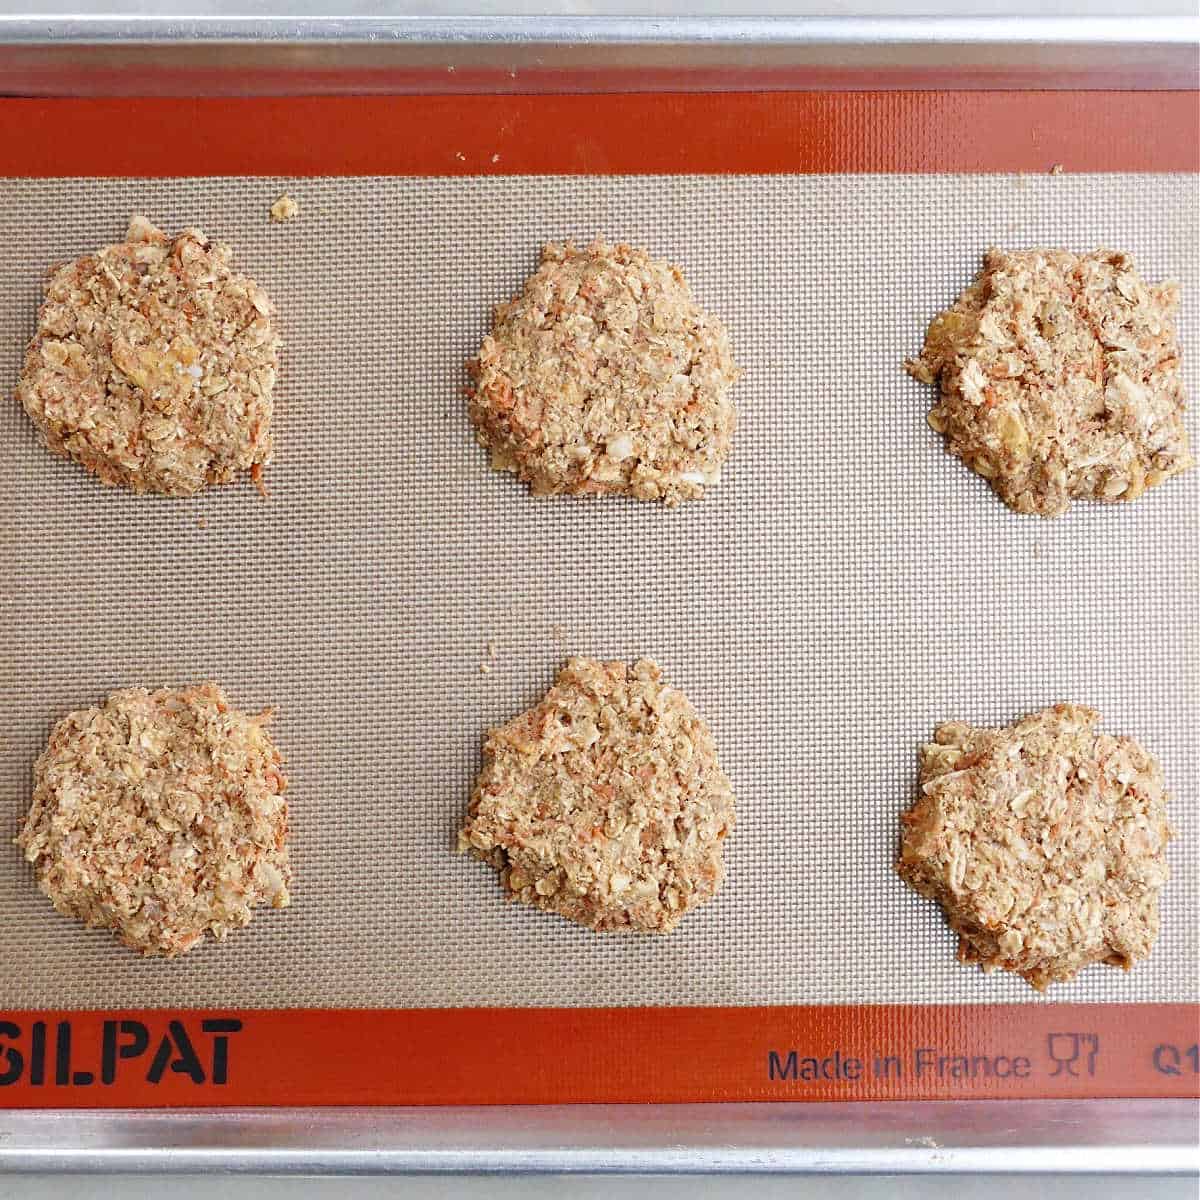 6 morning glory breakfast cookies on a lined baking sheet before going into the oven